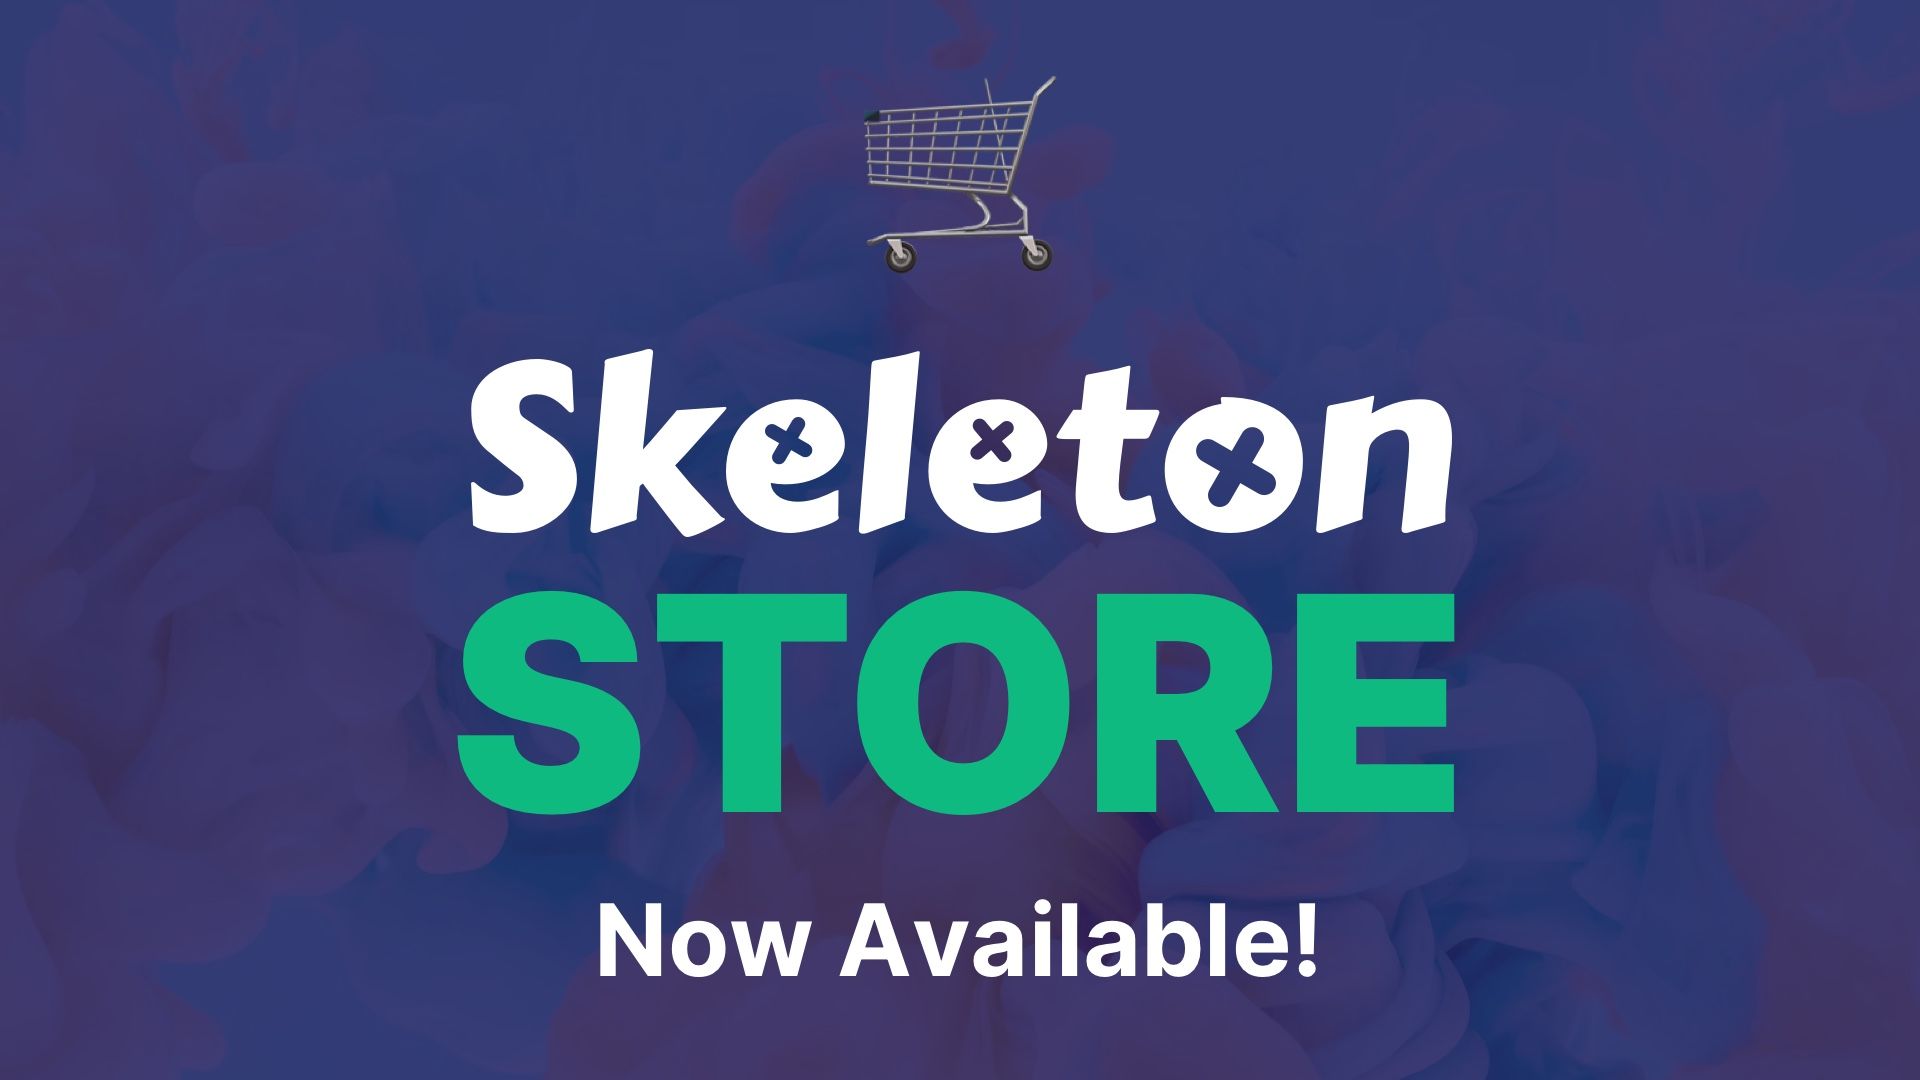 Announcing the Skeleton Store!